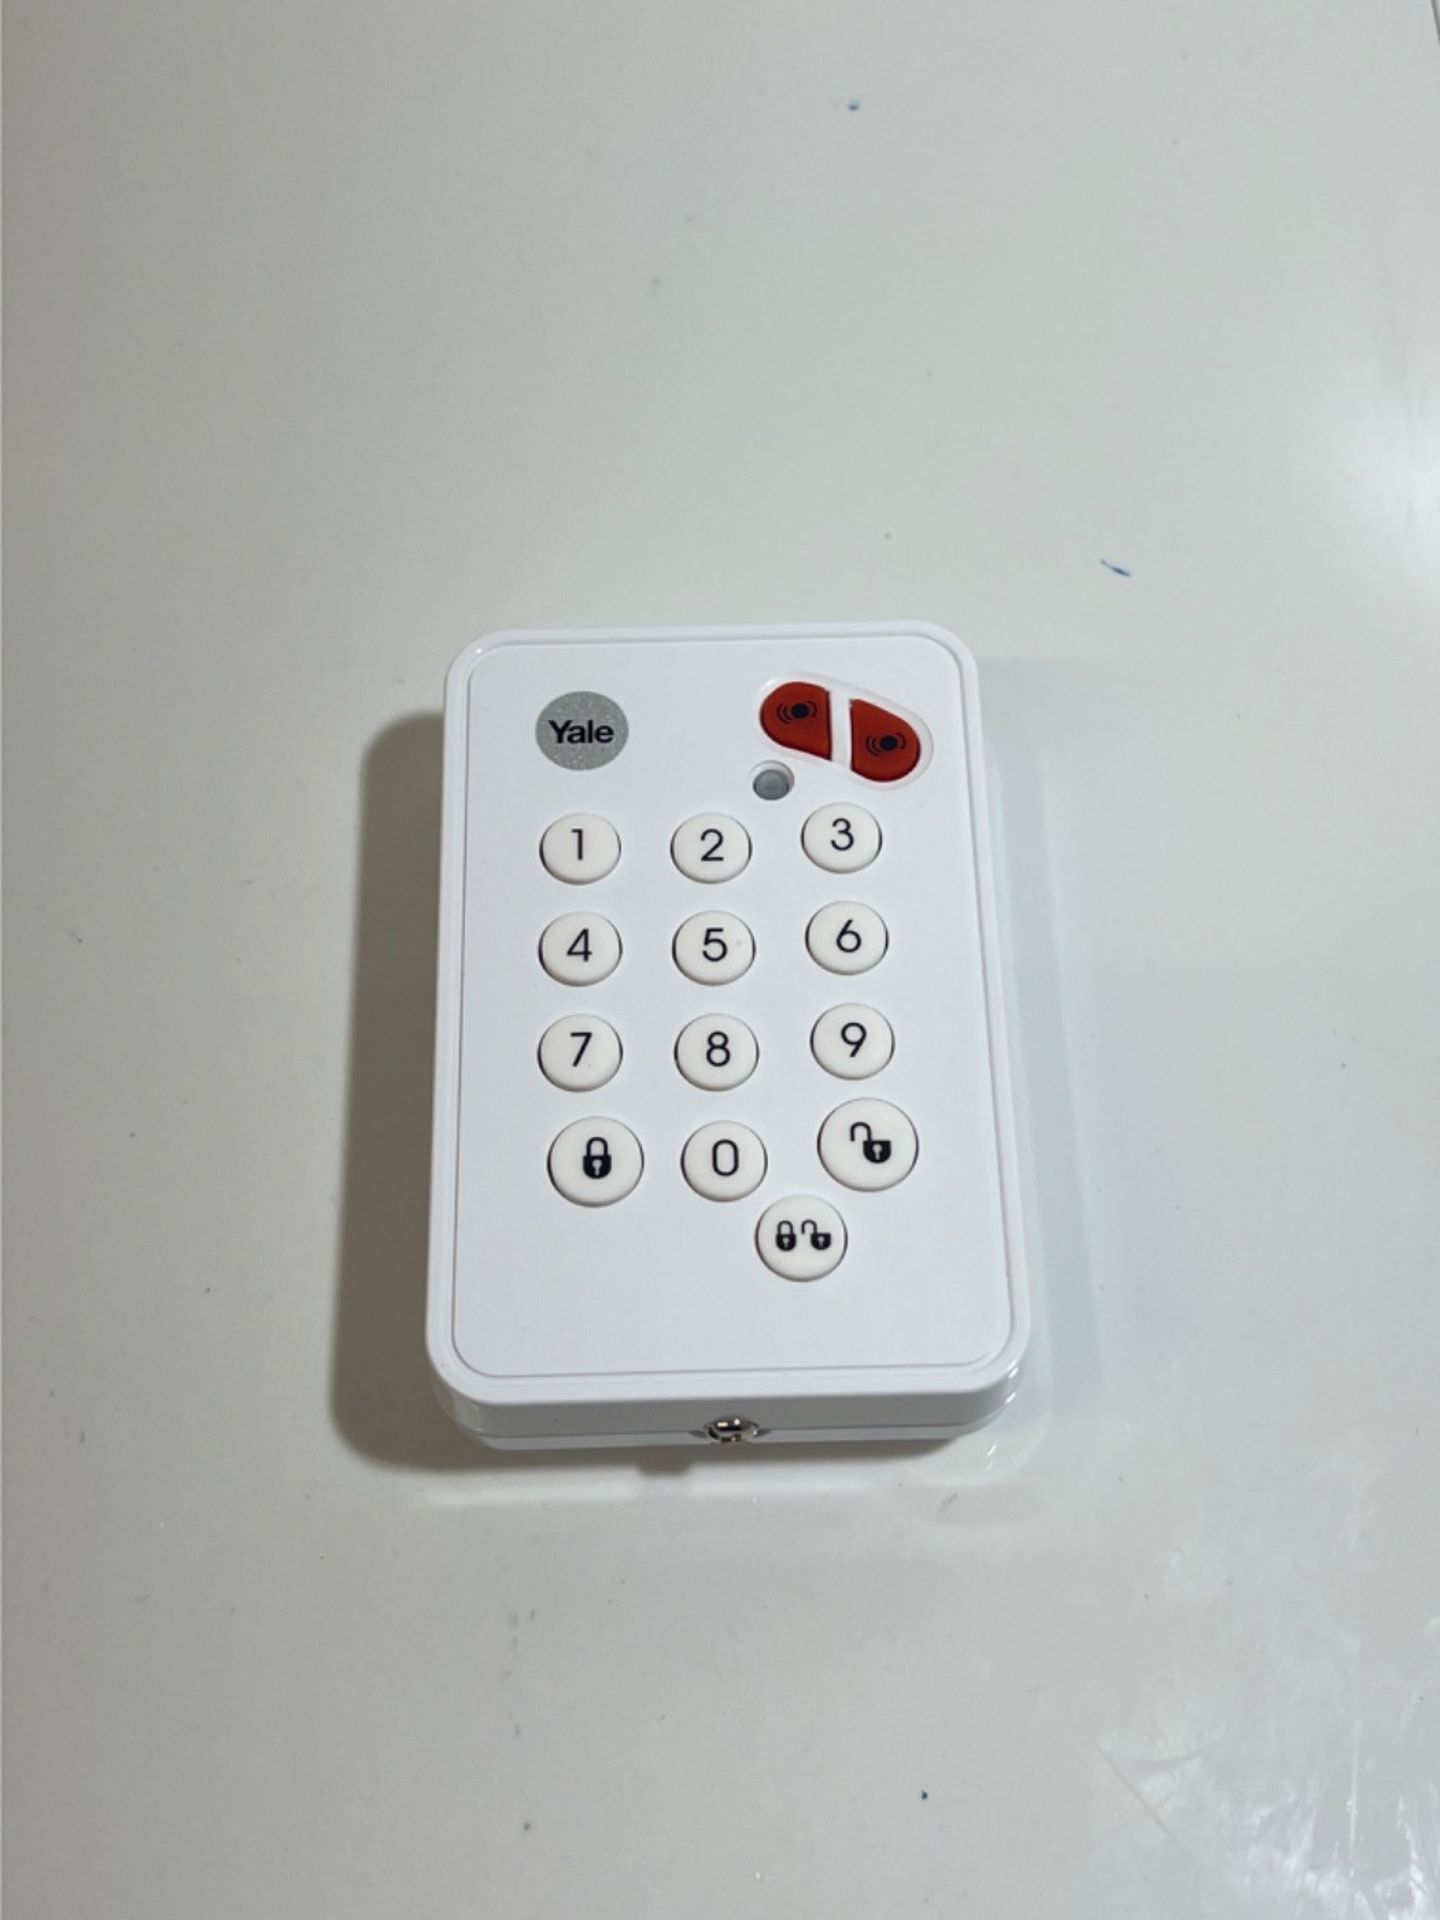 Yale EF-KP Easy Fit Alarm Remote Keypad, White, Accessory for SR & EF Alarms - Image 3 of 3